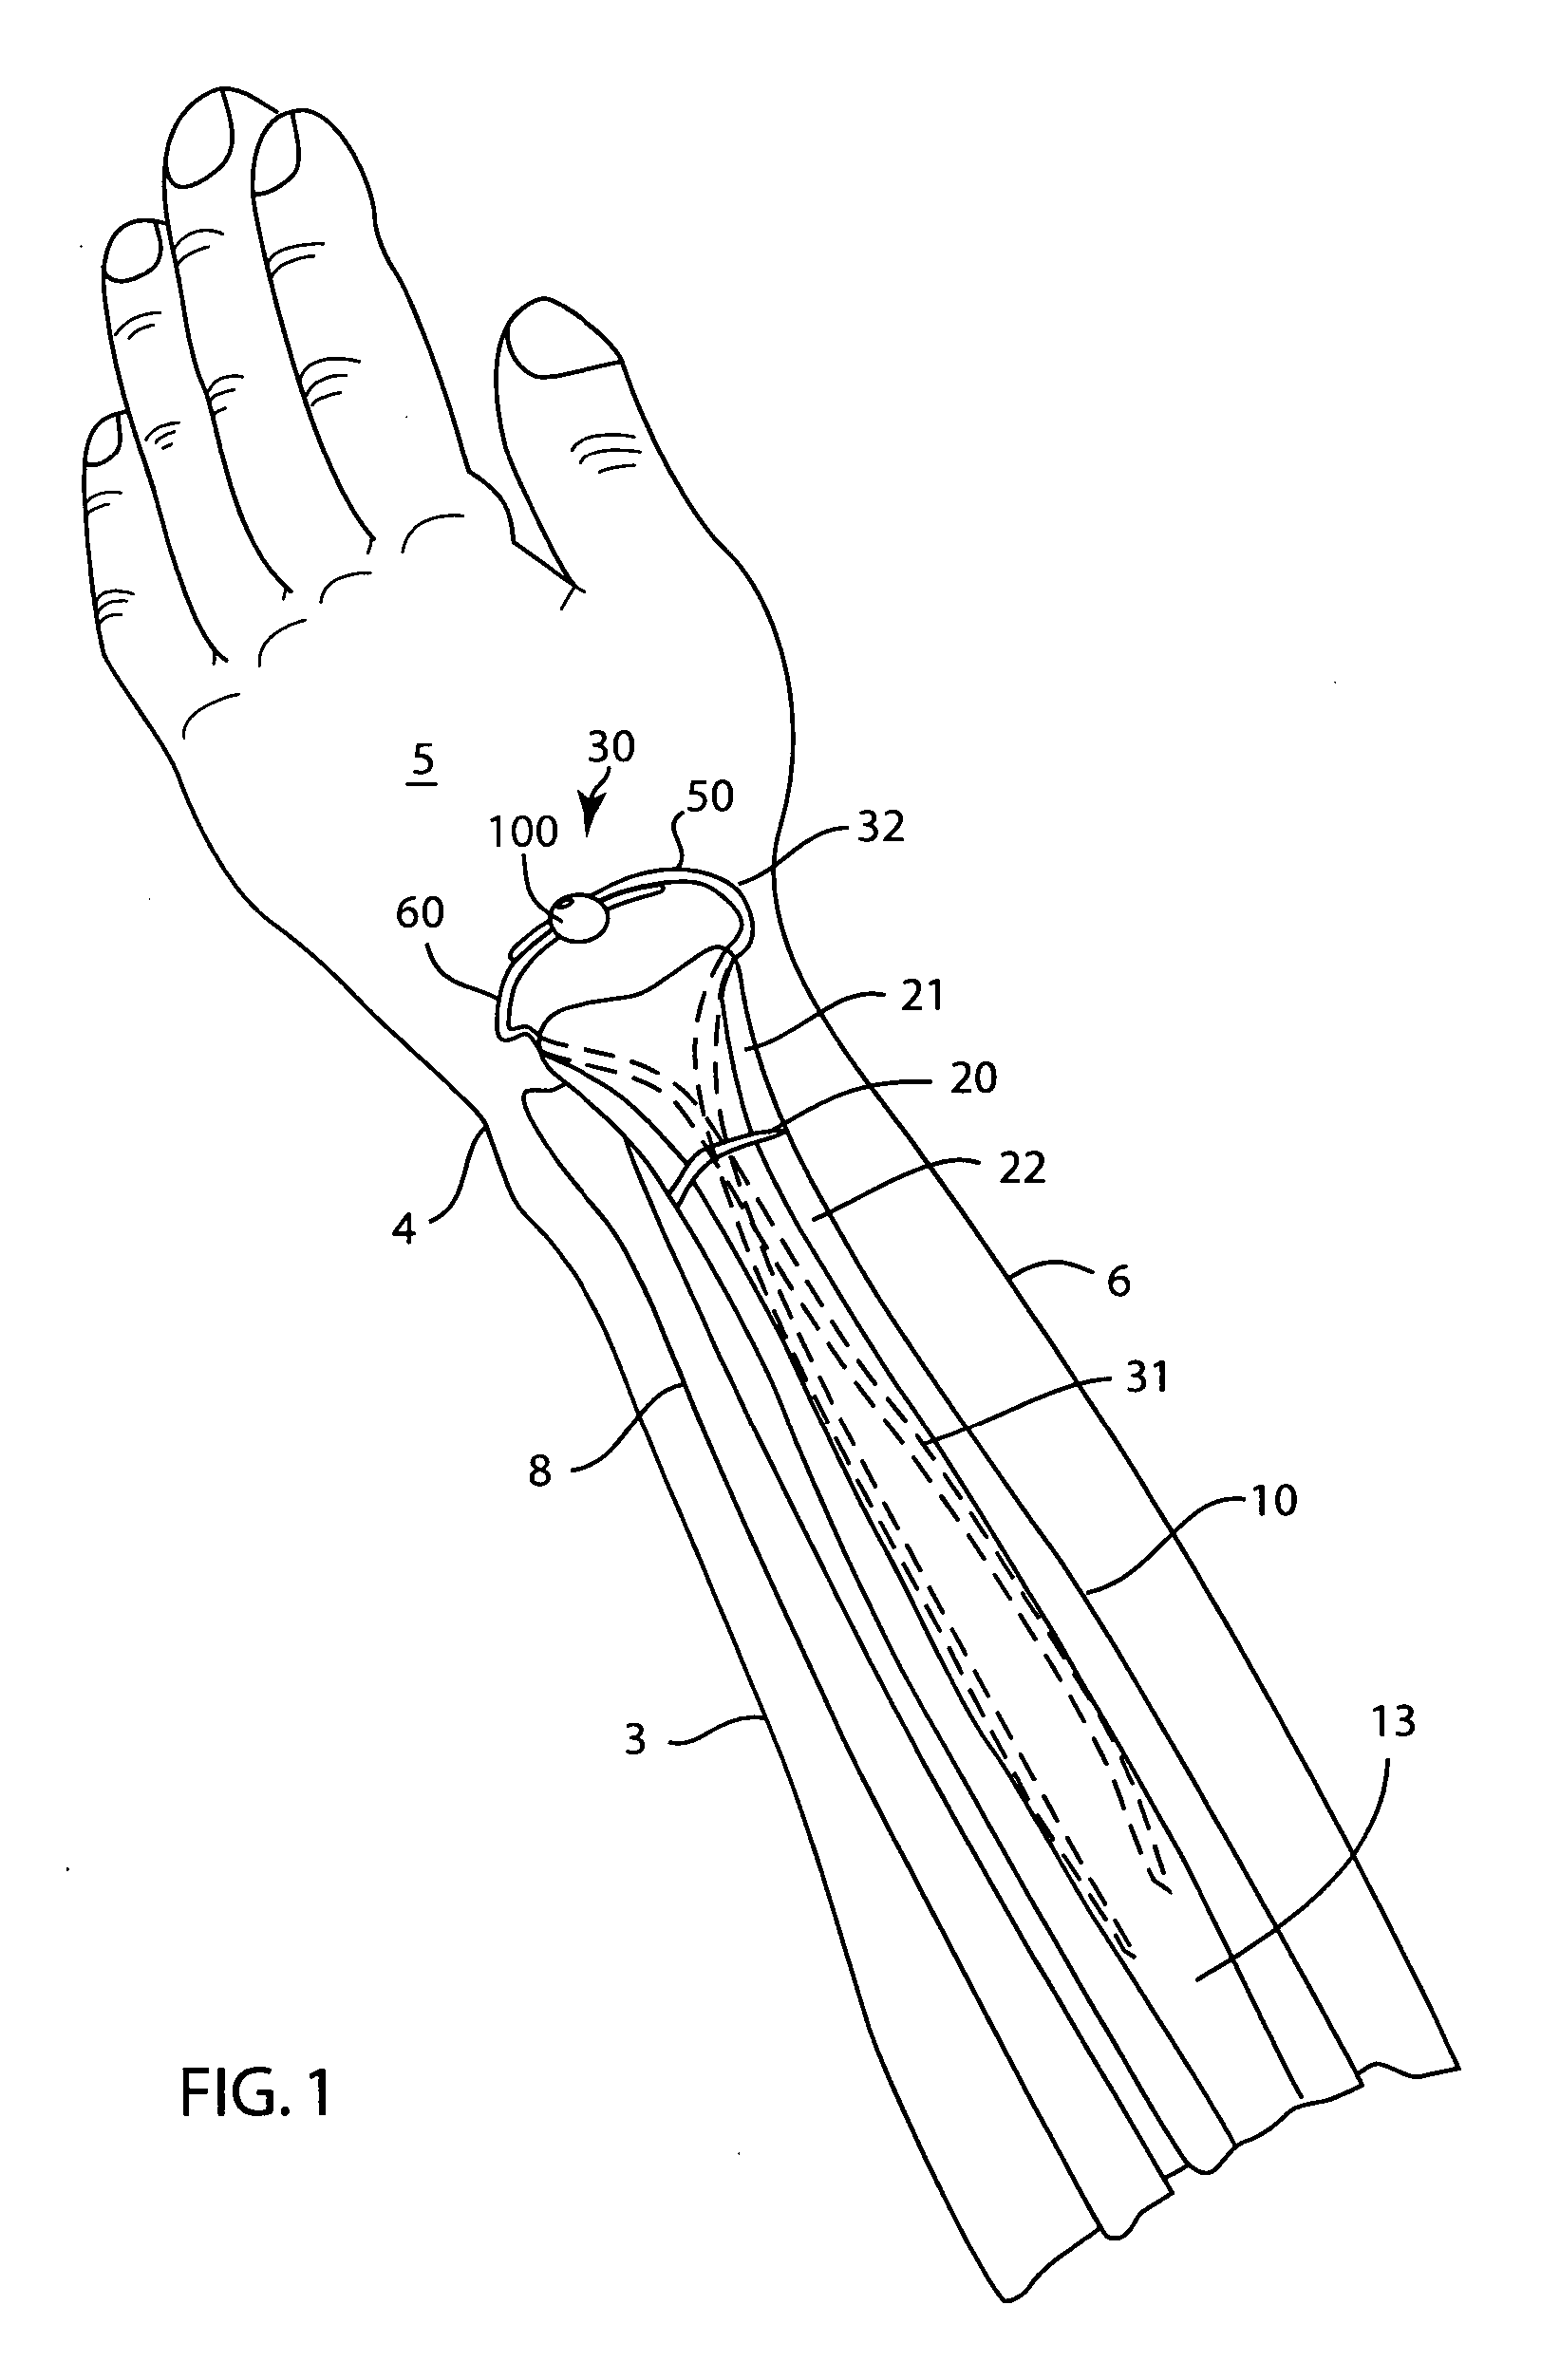 Fixator for a fractured bone